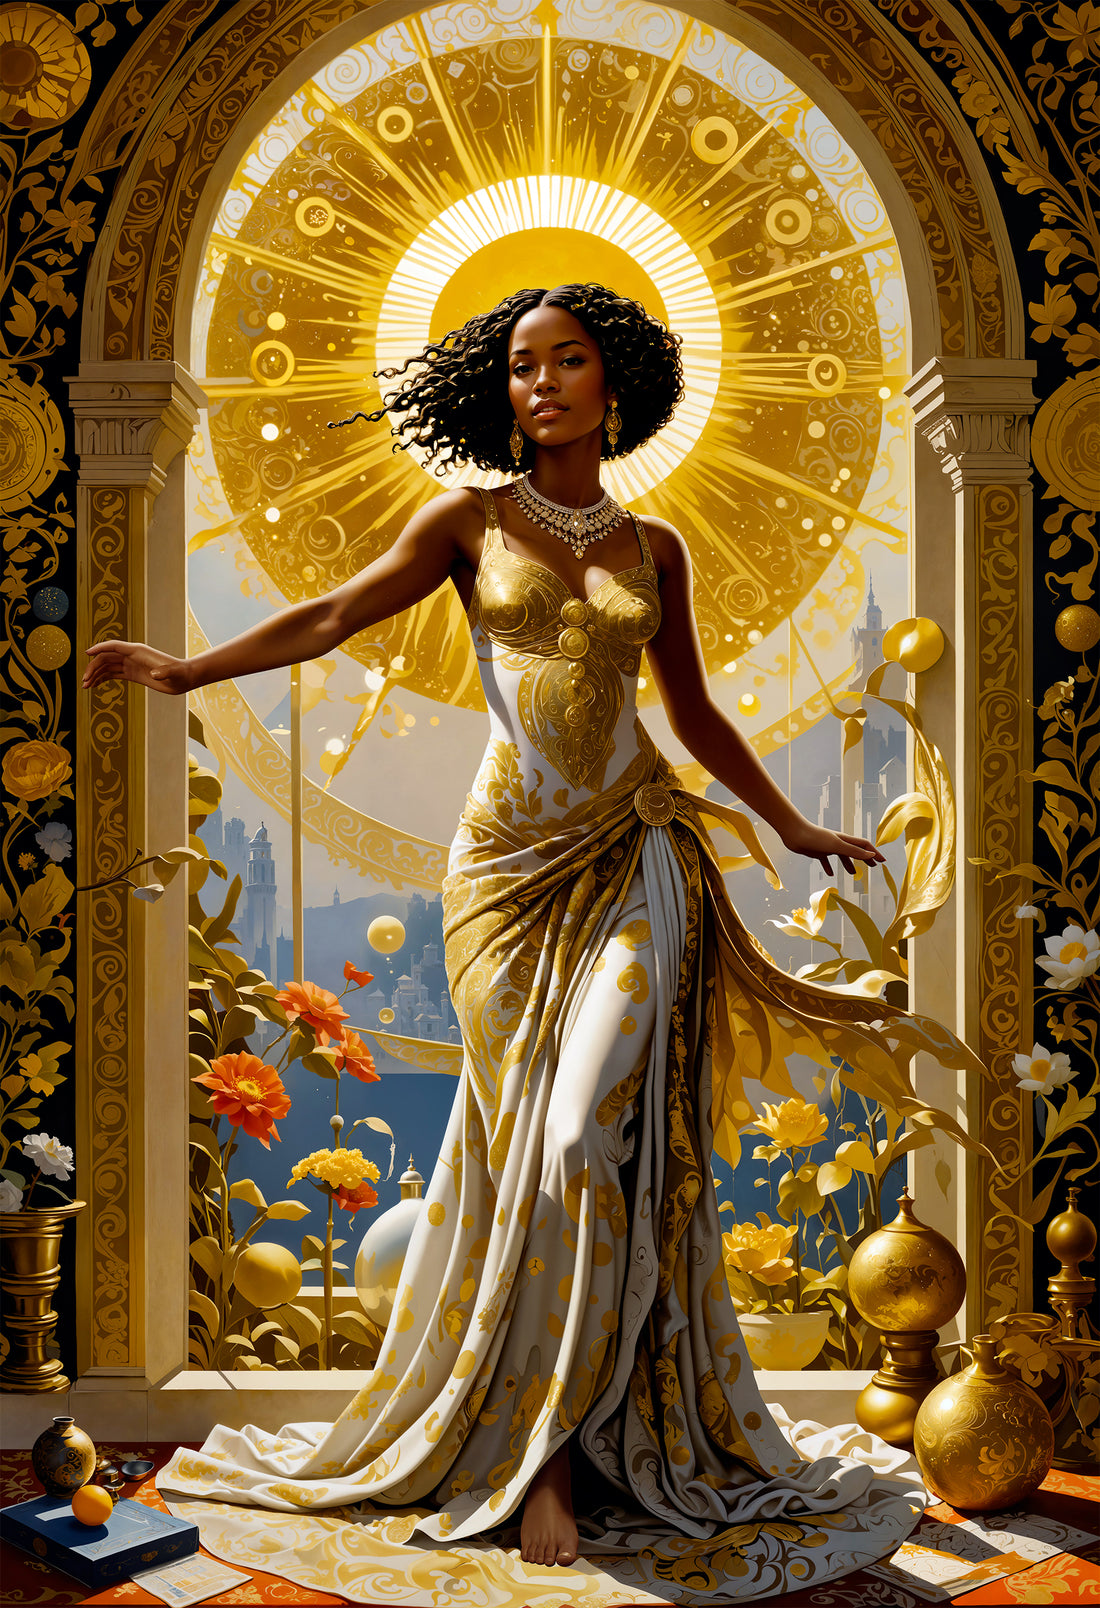 A painting that shows a beautiful woman surrounded by symbols of wealth.